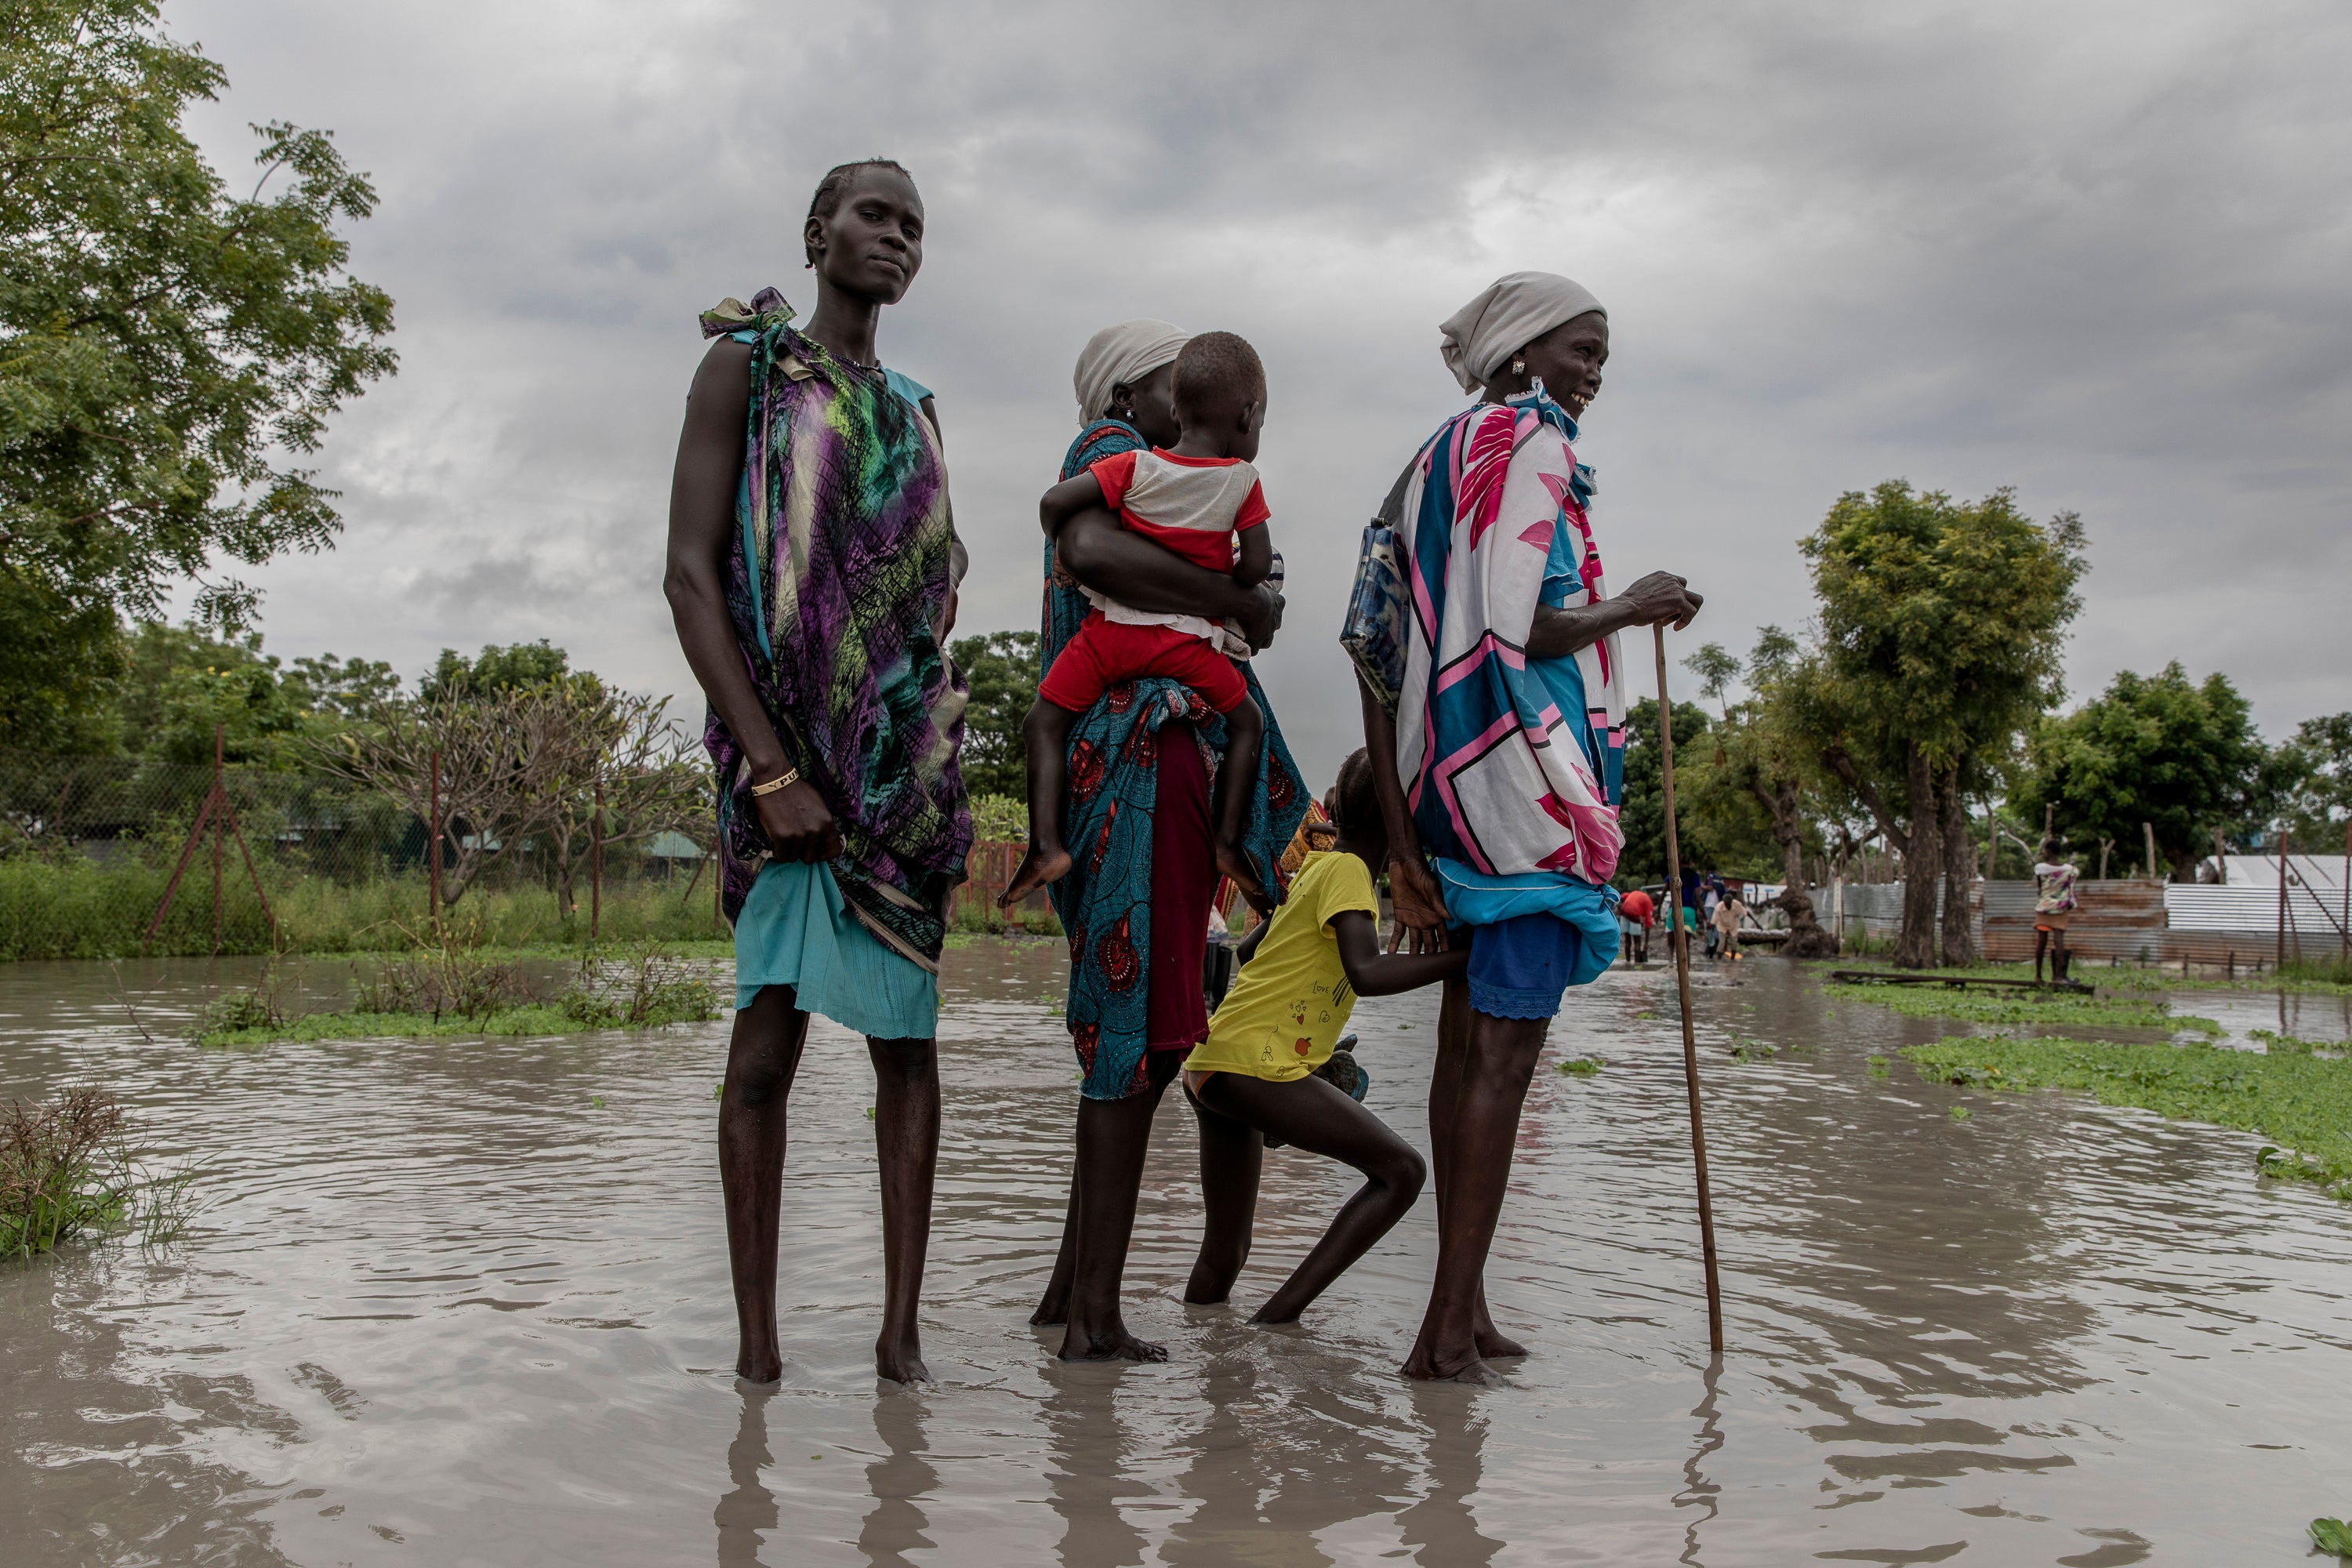 Martha Nyakoang and her family walk for an hour in in waist-high water to get to church in Old Fangak, South Sudan